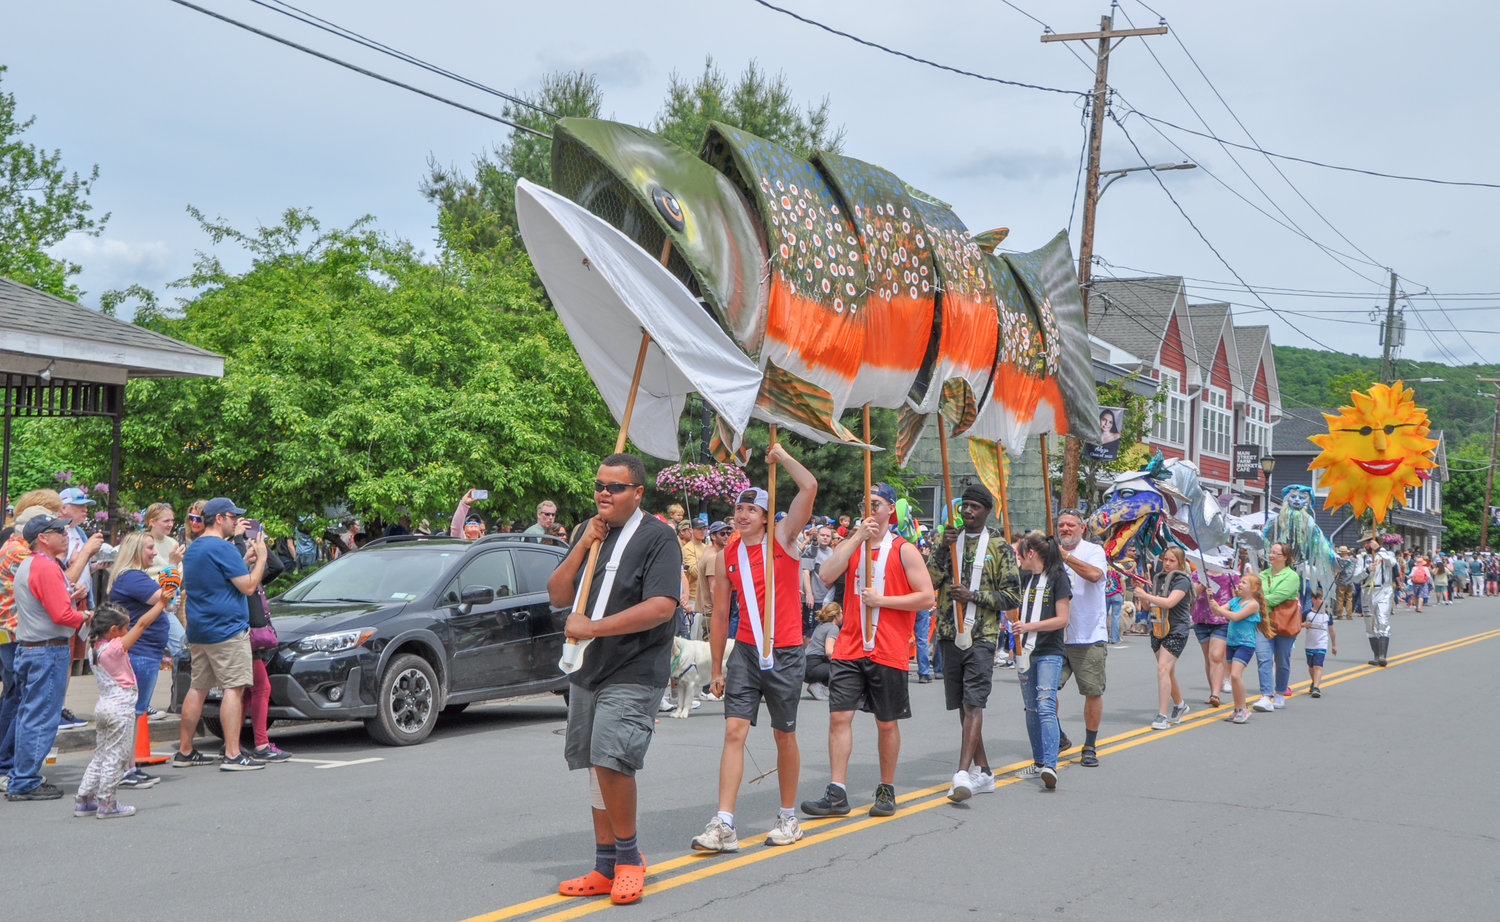 It wouldn't be the Livingston Manor Trout parade without its mascot, the giant, um, trout.